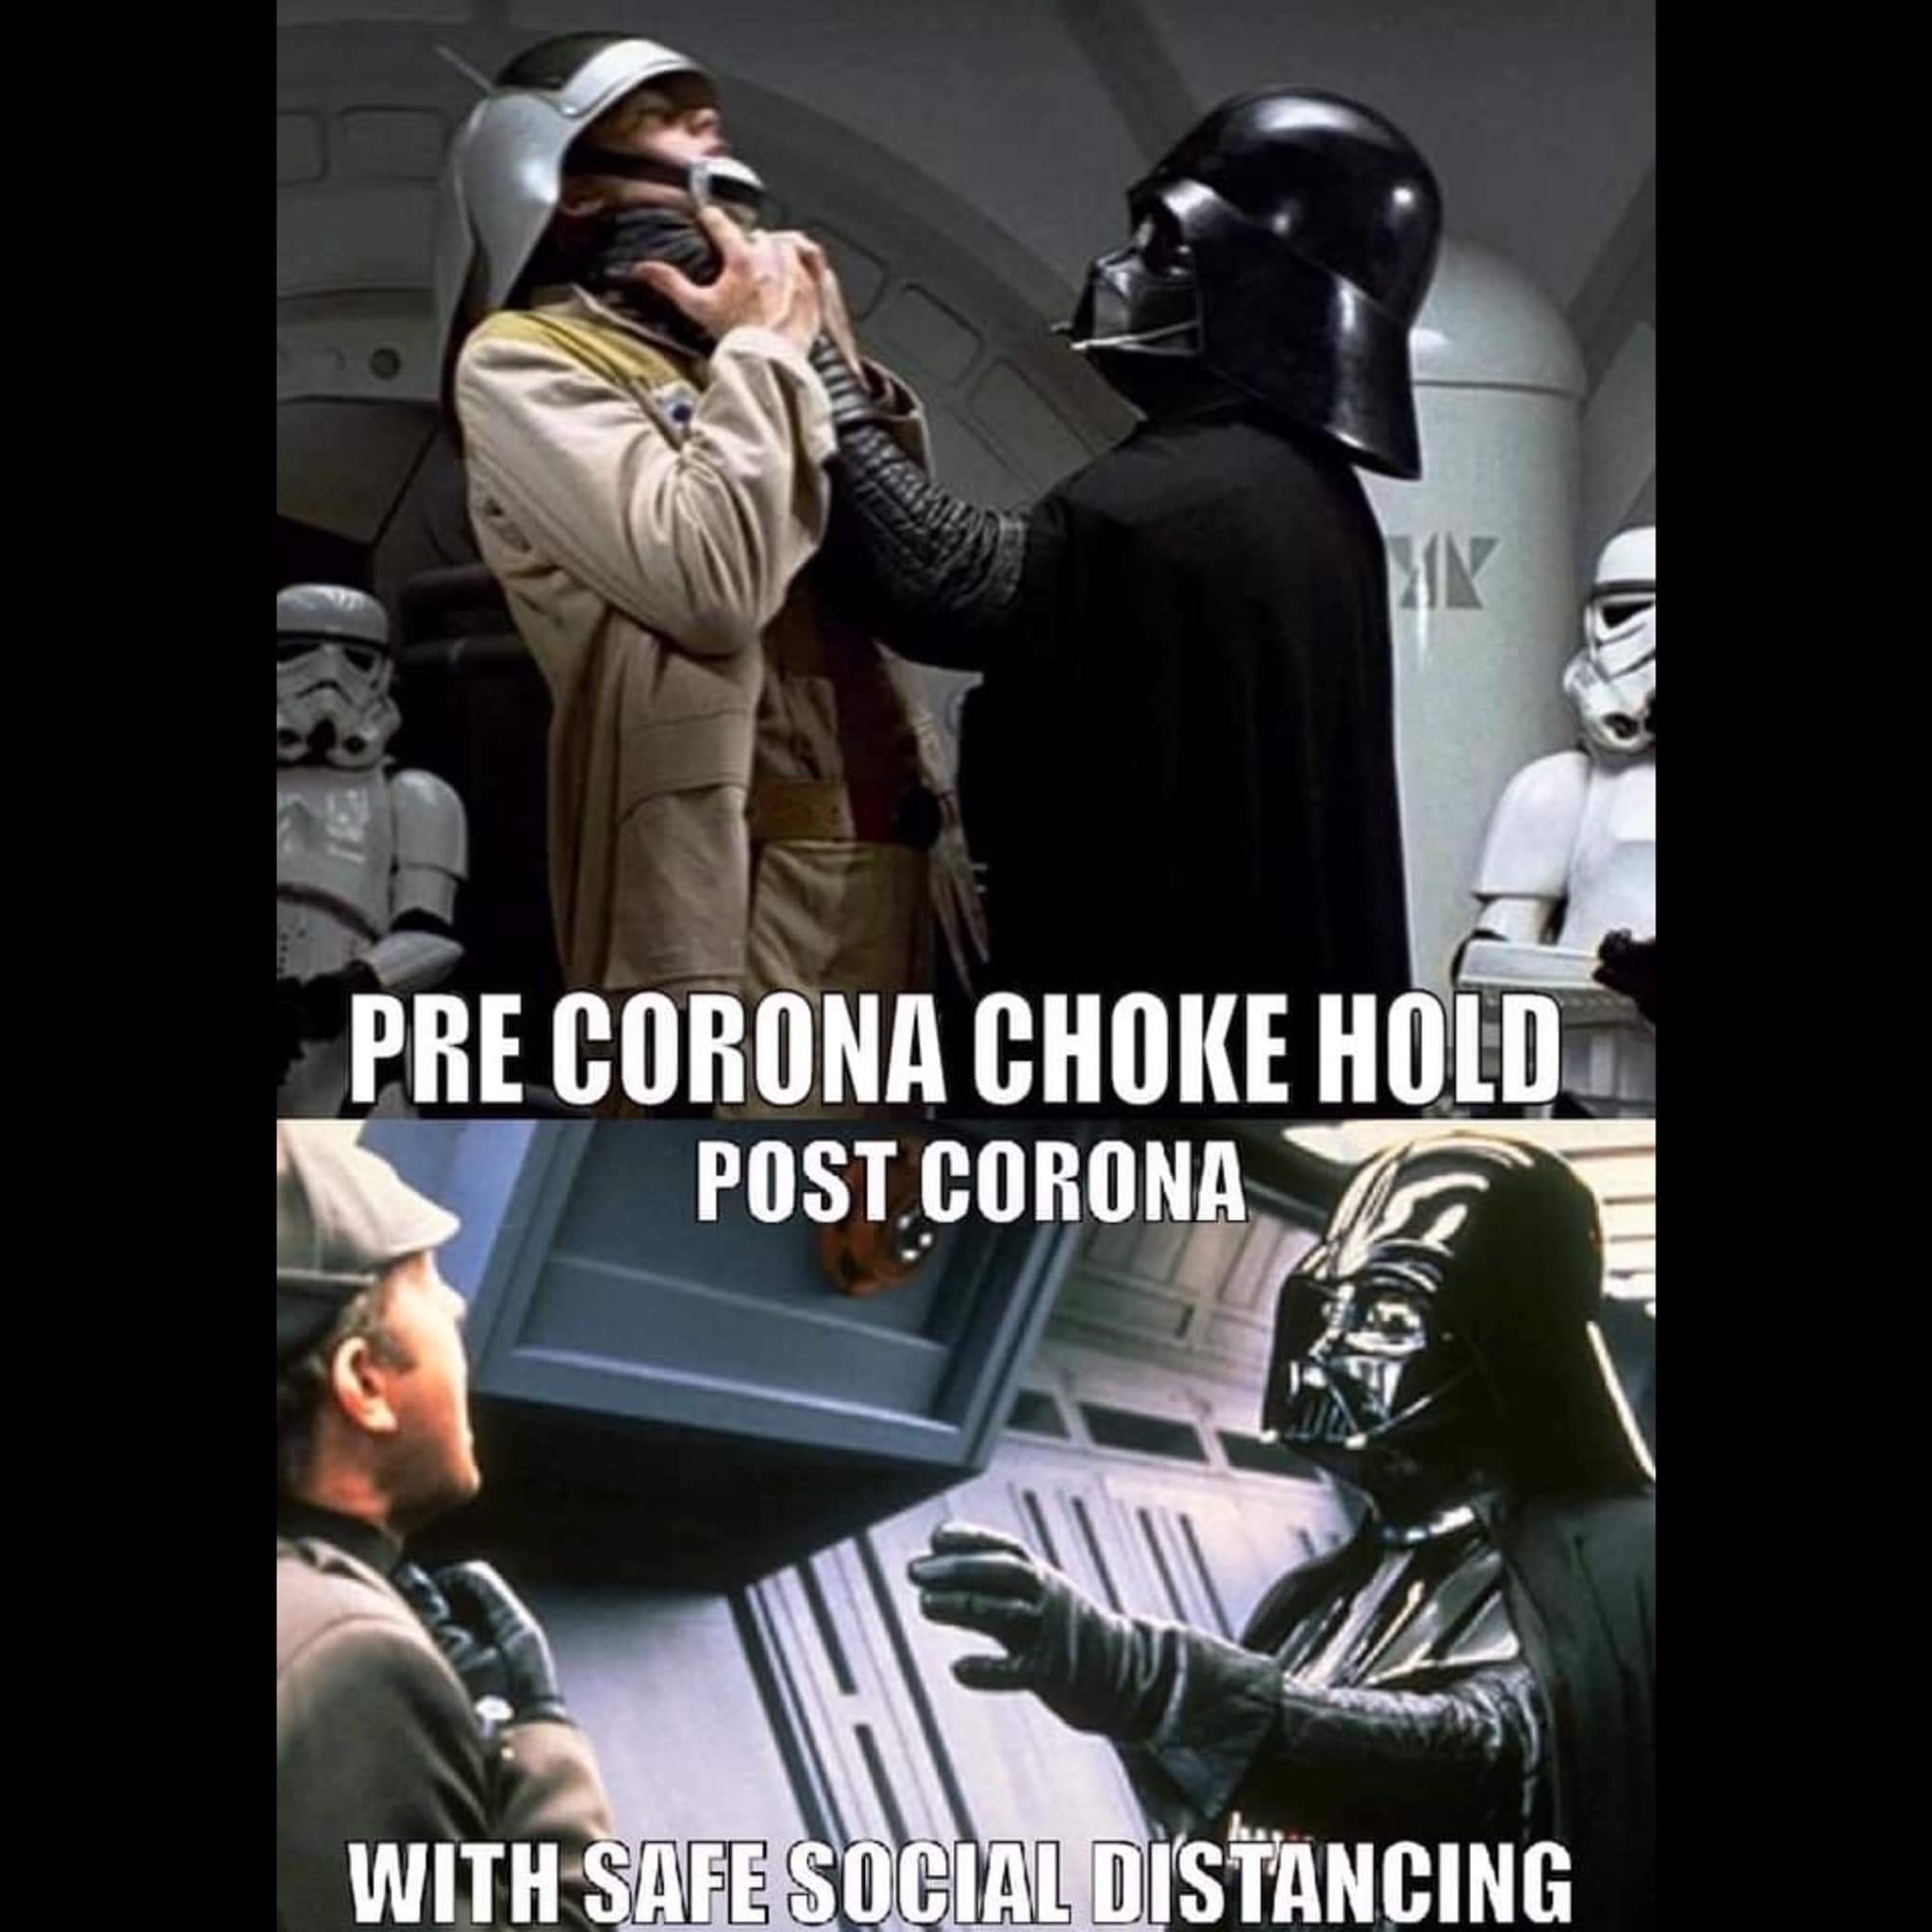 strong people don t put others down darth vader - Pre Corona Choke Hoid Post.Corona 10 With Safe Social Distancing